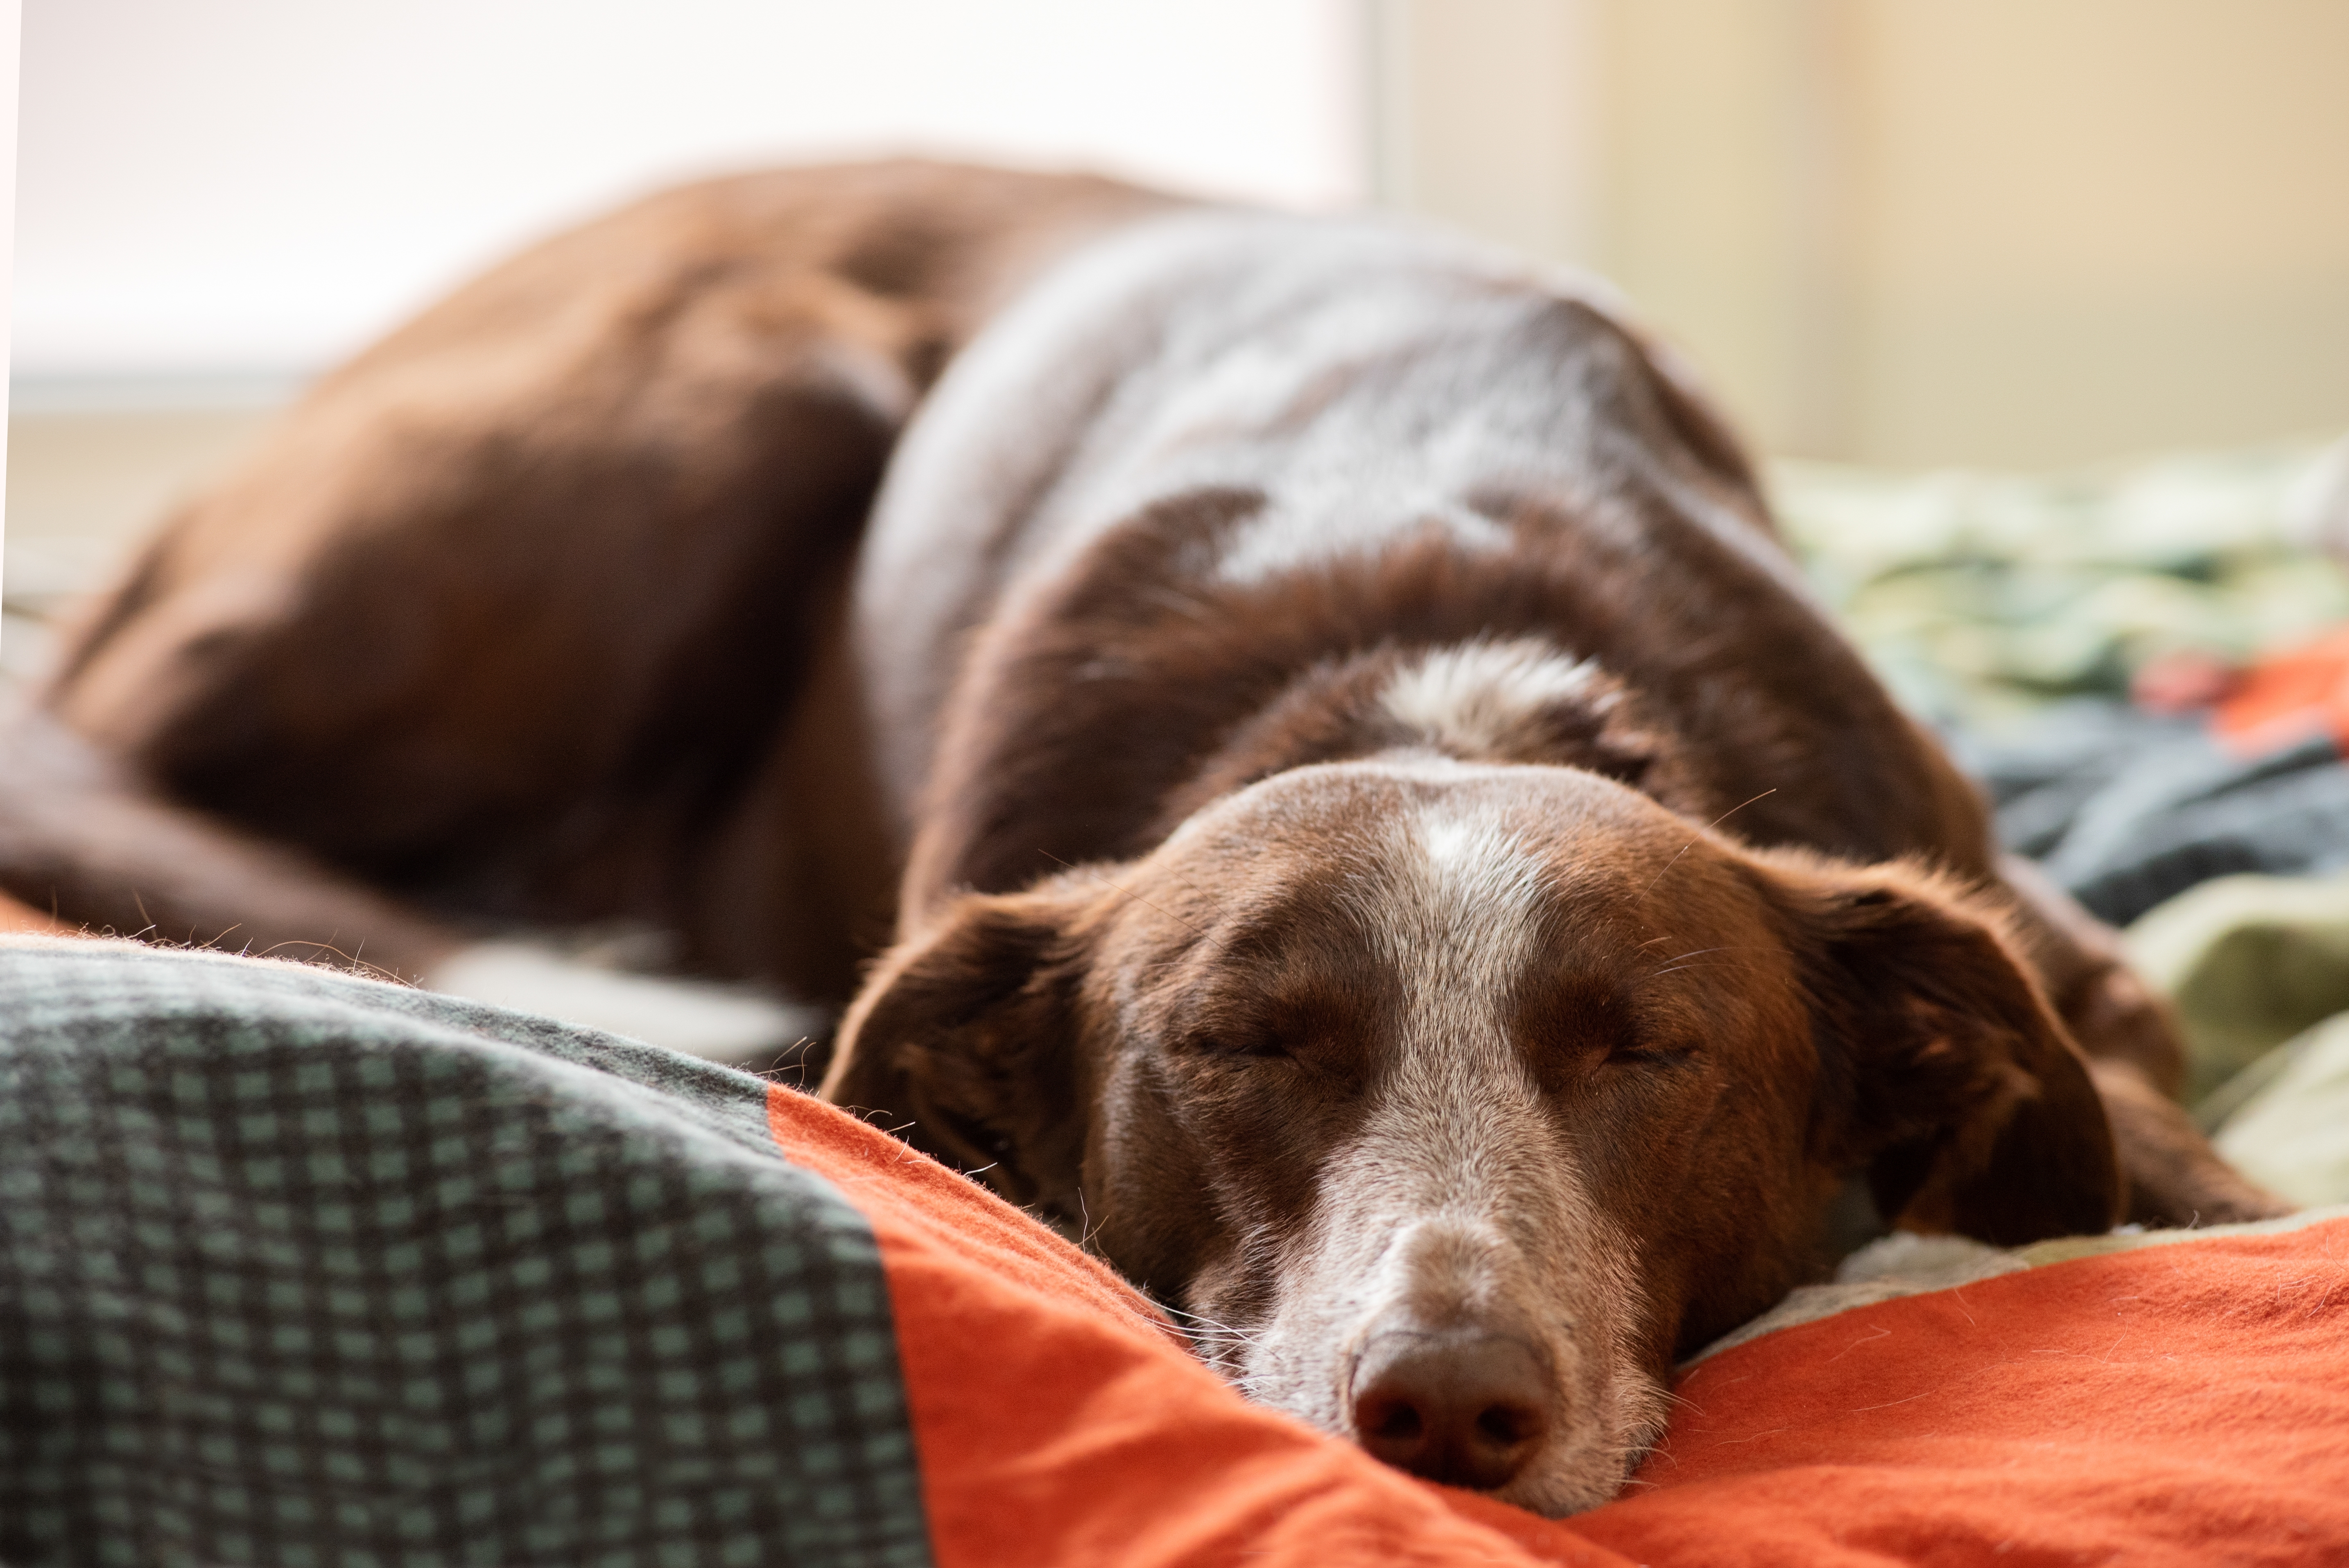 A dog sleeping on a bed | Source: Shutterstock